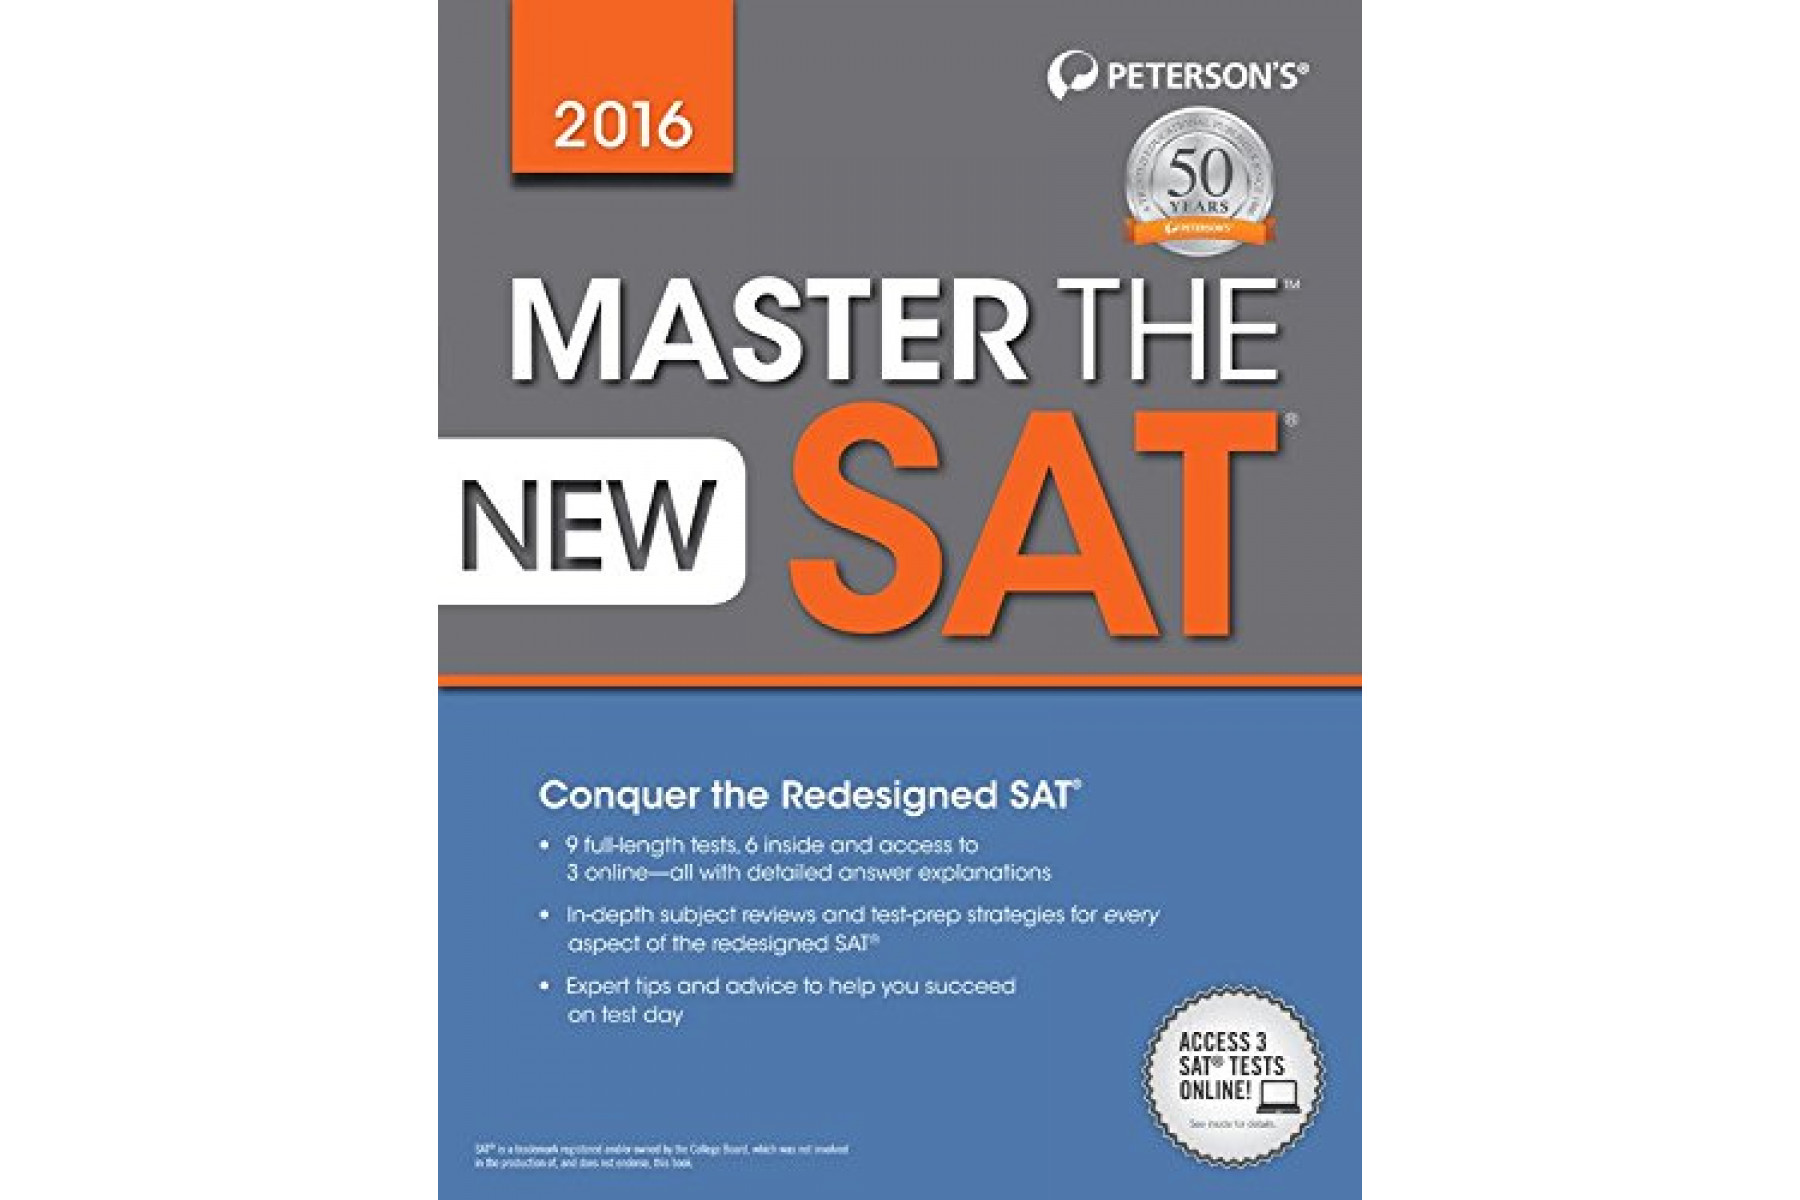 Master the New SAT 2016 (Peterson's Sat Prep Guide)